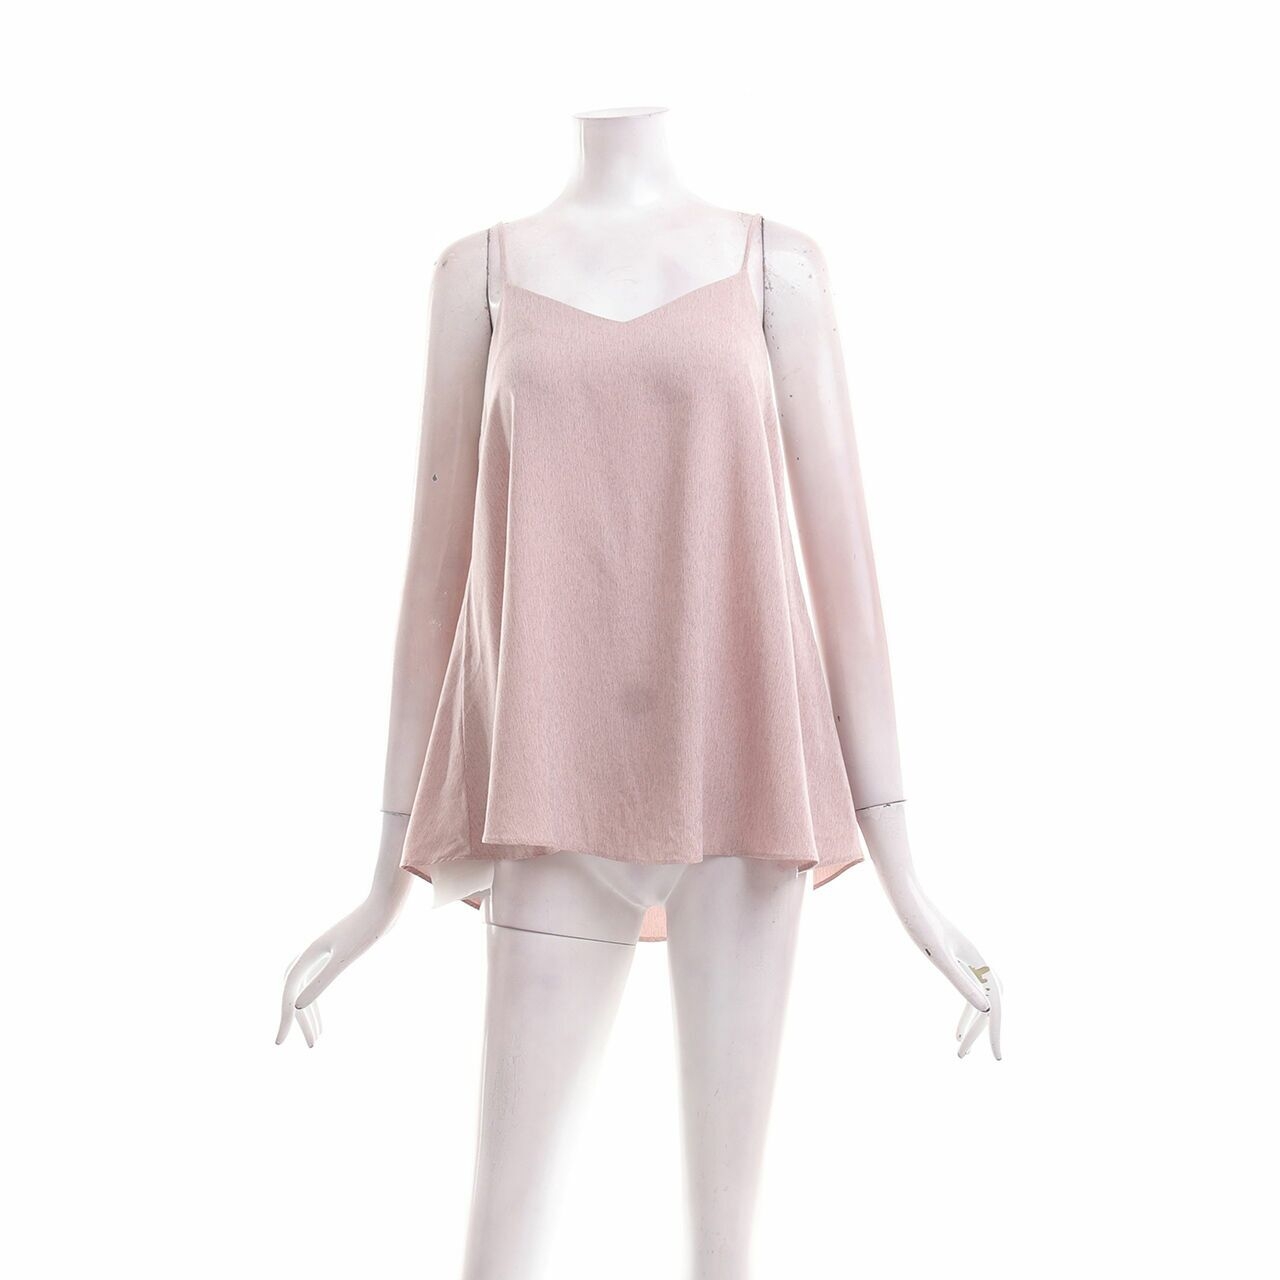 Krom Collective Pink Sleeveless